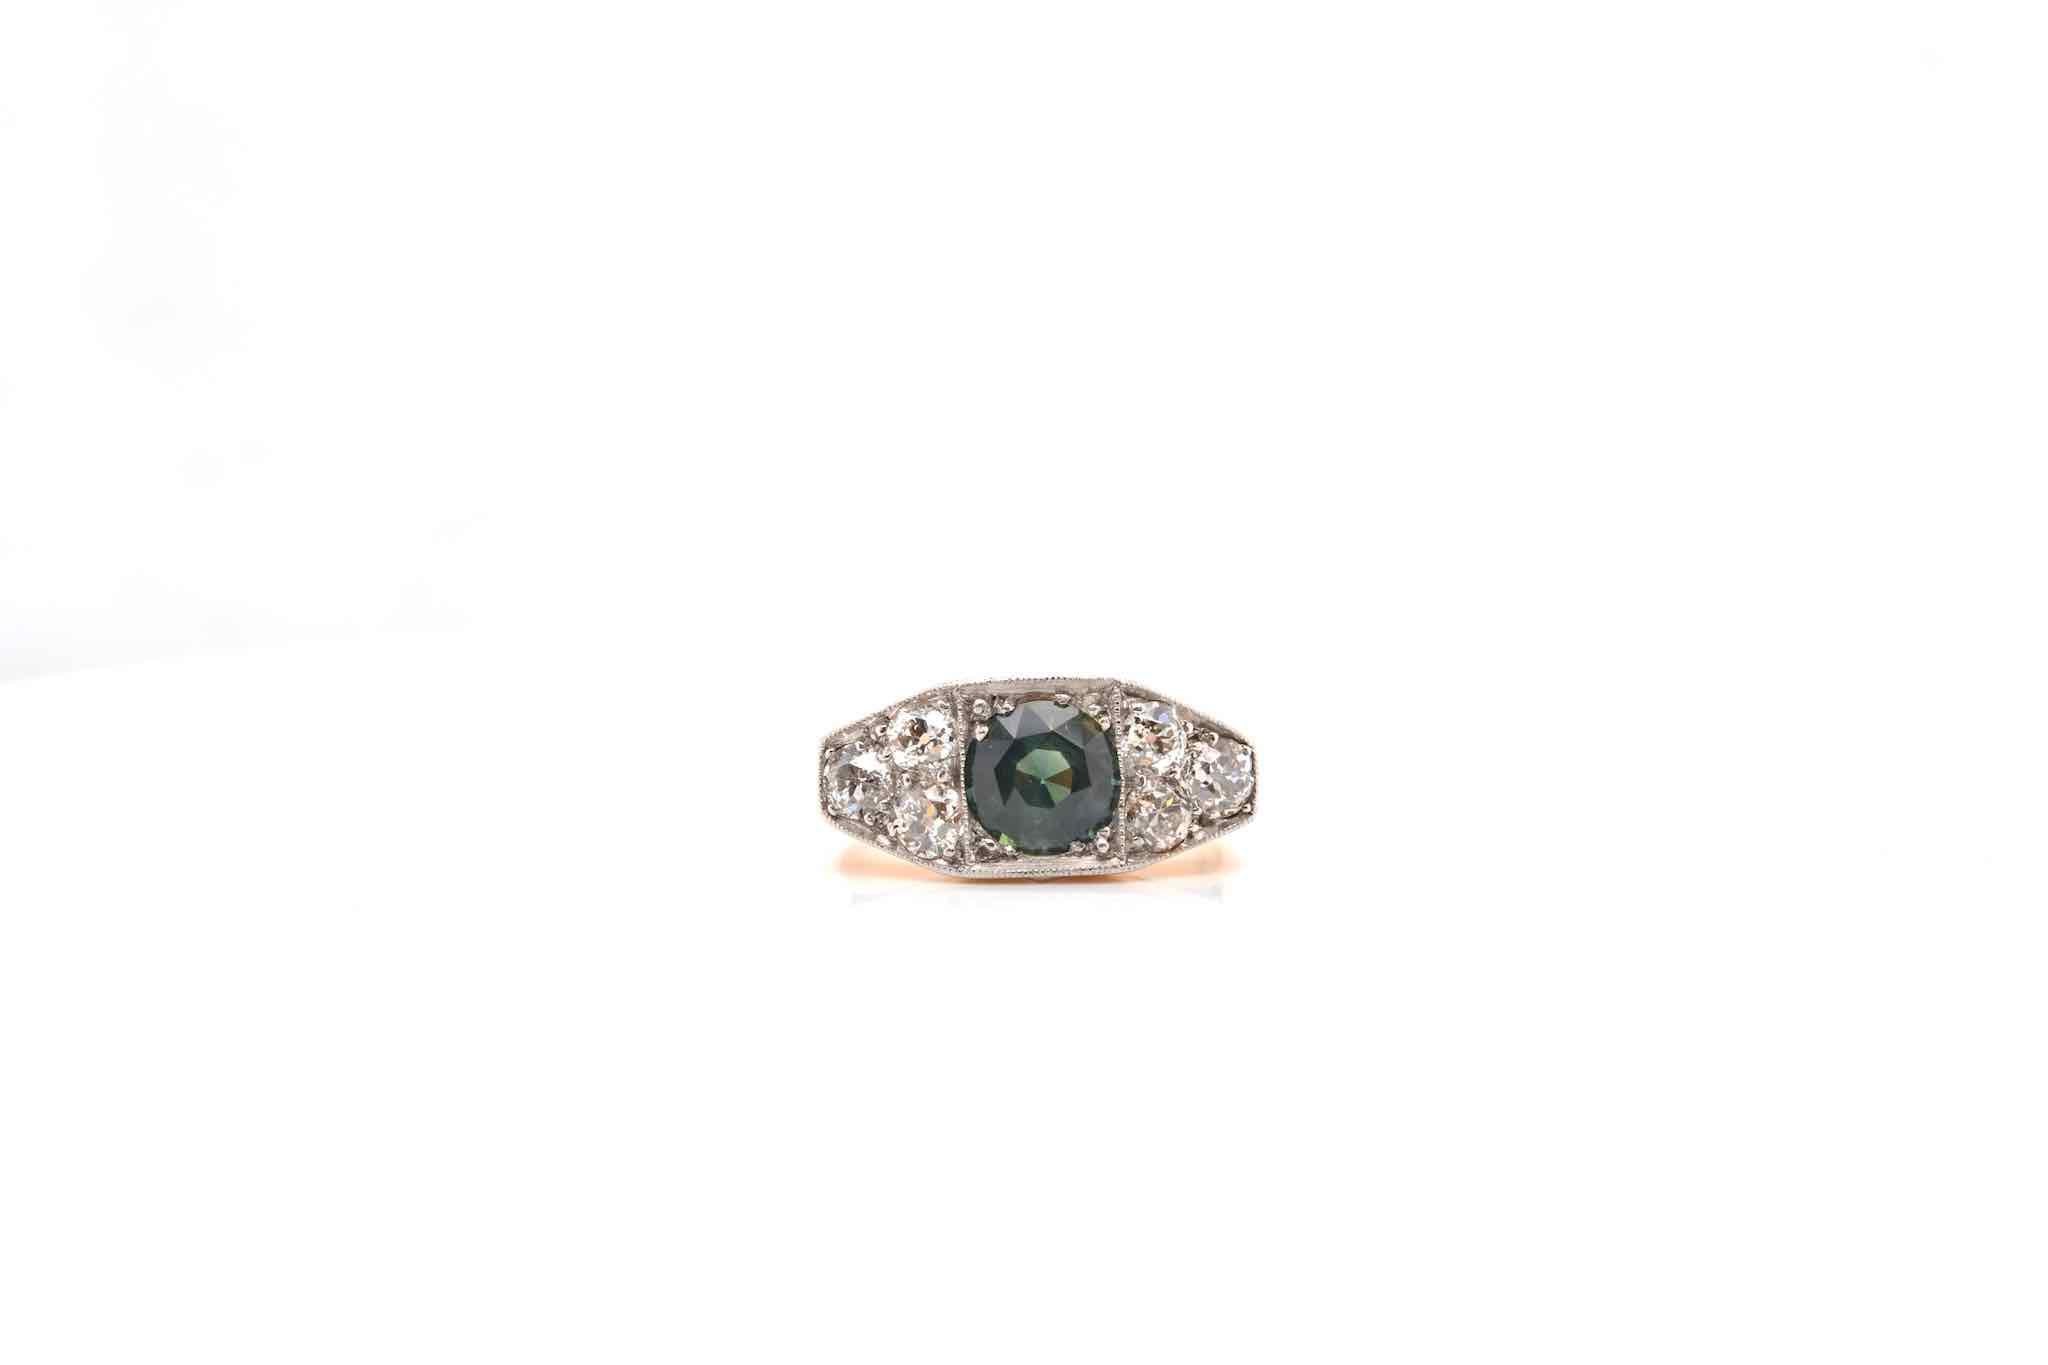 Stones: Green sapphire and diamonds
Material: 18k yellow gold and platinum
Dimensions: 0.80 cm length on finger
Period: 1940
Weight: 5.90g
Size: 56 (free sizing)
Certificate
Ref. : 24765
